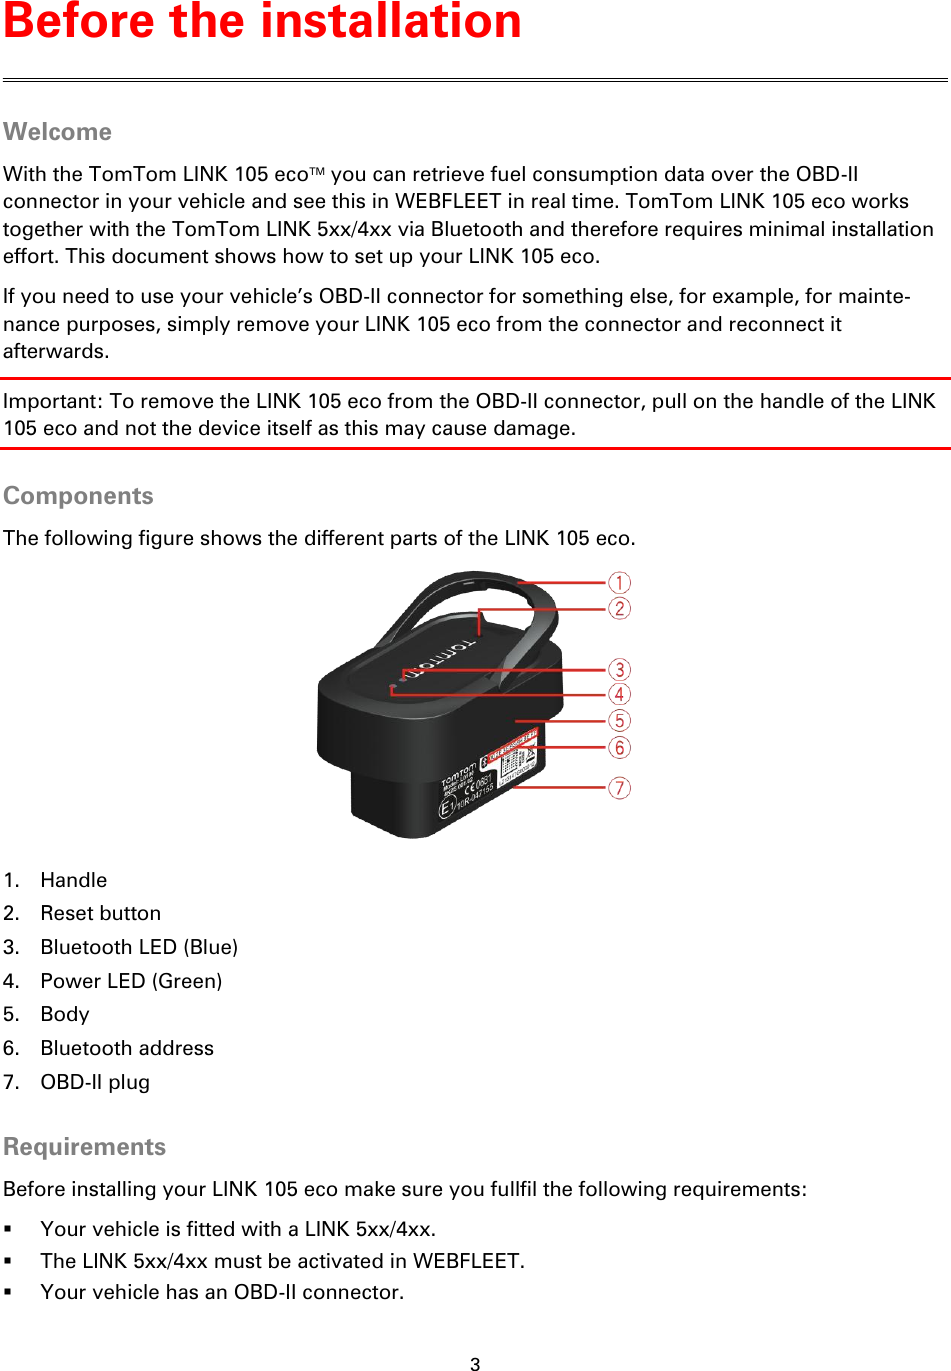 3    Welcome With the TomTom LINK 105 ecoTM you can retrieve fuel consumption data over the OBD-II connector in your vehicle and see this in WEBFLEET in real time. TomTom LINK 105 eco works together with the TomTom LINK 5xx/4xx via Bluetooth and therefore requires minimal installation effort. This document shows how to set up your LINK 105 eco. If you need to use your vehicle’s OBD-II connector for something else, for example, for mainte-nance purposes, simply remove your LINK 105 eco from the connector and reconnect it afterwards. Important: To remove the LINK 105 eco from the OBD-II connector, pull on the handle of the LINK 105 eco and not the device itself as this may cause damage.  Components The following figure shows the different parts of the LINK 105 eco.  1. Handle 2. Reset button 3. Bluetooth LED (Blue) 4. Power LED (Green) 5. Body 6. Bluetooth address 7. OBD-II plug  Requirements Before installing your LINK 105 eco make sure you fullfil the following requirements:  Your vehicle is fitted with a LINK 5xx/4xx.  The LINK 5xx/4xx must be activated in WEBFLEET.  Your vehicle has an OBD-II connector. Before the installation 